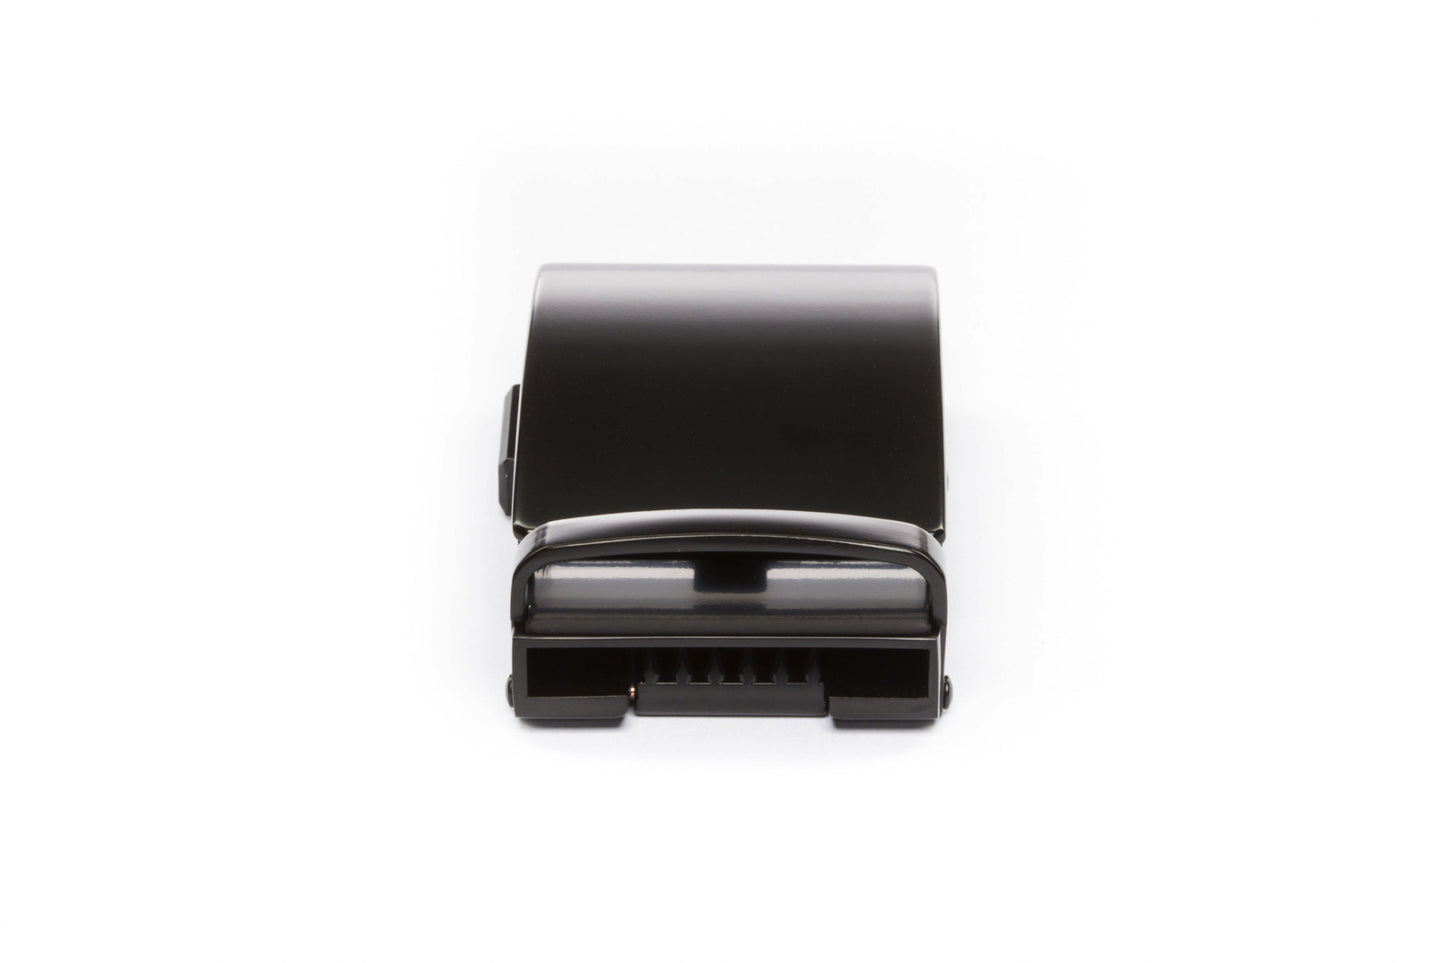 Men's classic ratchet belt buckle in black with a width of 1.5 inches, rear view.